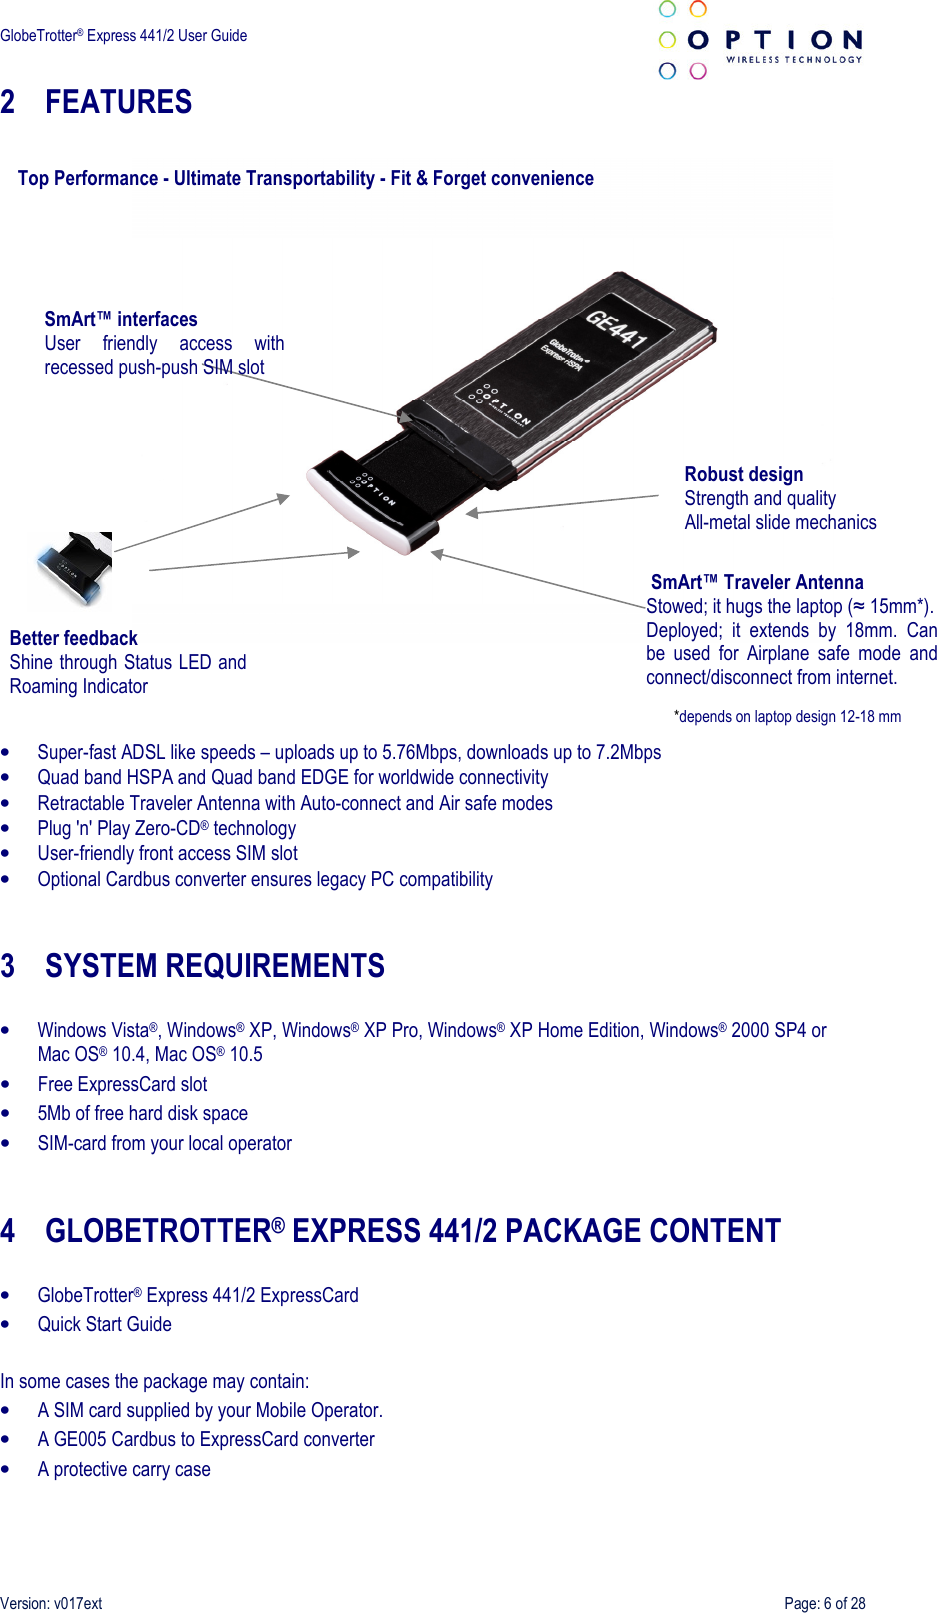  GlobeTrotter® Express 441/2 User Guide    Version: v017ext  Page: 6 of 28 2 FEATURES         • Super-fast ADSL like speeds – uploads up to 5.76Mbps, downloads up to 7.2Mbps • Quad band HSPA and Quad band EDGE for worldwide connectivity • Retractable Traveler Antenna with Auto-connect and Air safe modes • Plug &apos;n&apos; Play Zero-CD® technology • User-friendly front access SIM slot • Optional Cardbus converter ensures legacy PC compatibility   3 SYSTEM REQUIREMENTS  • Windows Vista®, Windows® XP, Windows® XP Pro, Windows® XP Home Edition, Windows® 2000 SP4 or Mac OS® 10.4, Mac OS® 10.5 • Free ExpressCard slot • 5Mb of free hard disk space • SIM-card from your local operator   4 GLOBETROTTER® EXPRESS 441/2 PACKAGE CONTENT  • GlobeTrotter® Express 441/2 ExpressCard • Quick Start Guide  In some cases the package may contain: • A SIM card supplied by your Mobile Operator. • A GE005 Cardbus to ExpressCard converter • A protective carry case  SmArt™ Traveler Antenna Stowed; it hugs the laptop (≈ 15mm*). Deployed;  it  extends  by  18mm.  Can be  used  for  Airplane  safe  mode  and connect/disconnect from internet. Top Performance - Ultimate Transportability - Fit &amp; Forget convenience Robust design  Strength and quality All-metal slide mechanics Better feedback Shine through Status LED and Roaming Indicator SmArt™ interfaces User  friendly  access  with recessed push-push SIM slot *depends on laptop design 12-18 mm 